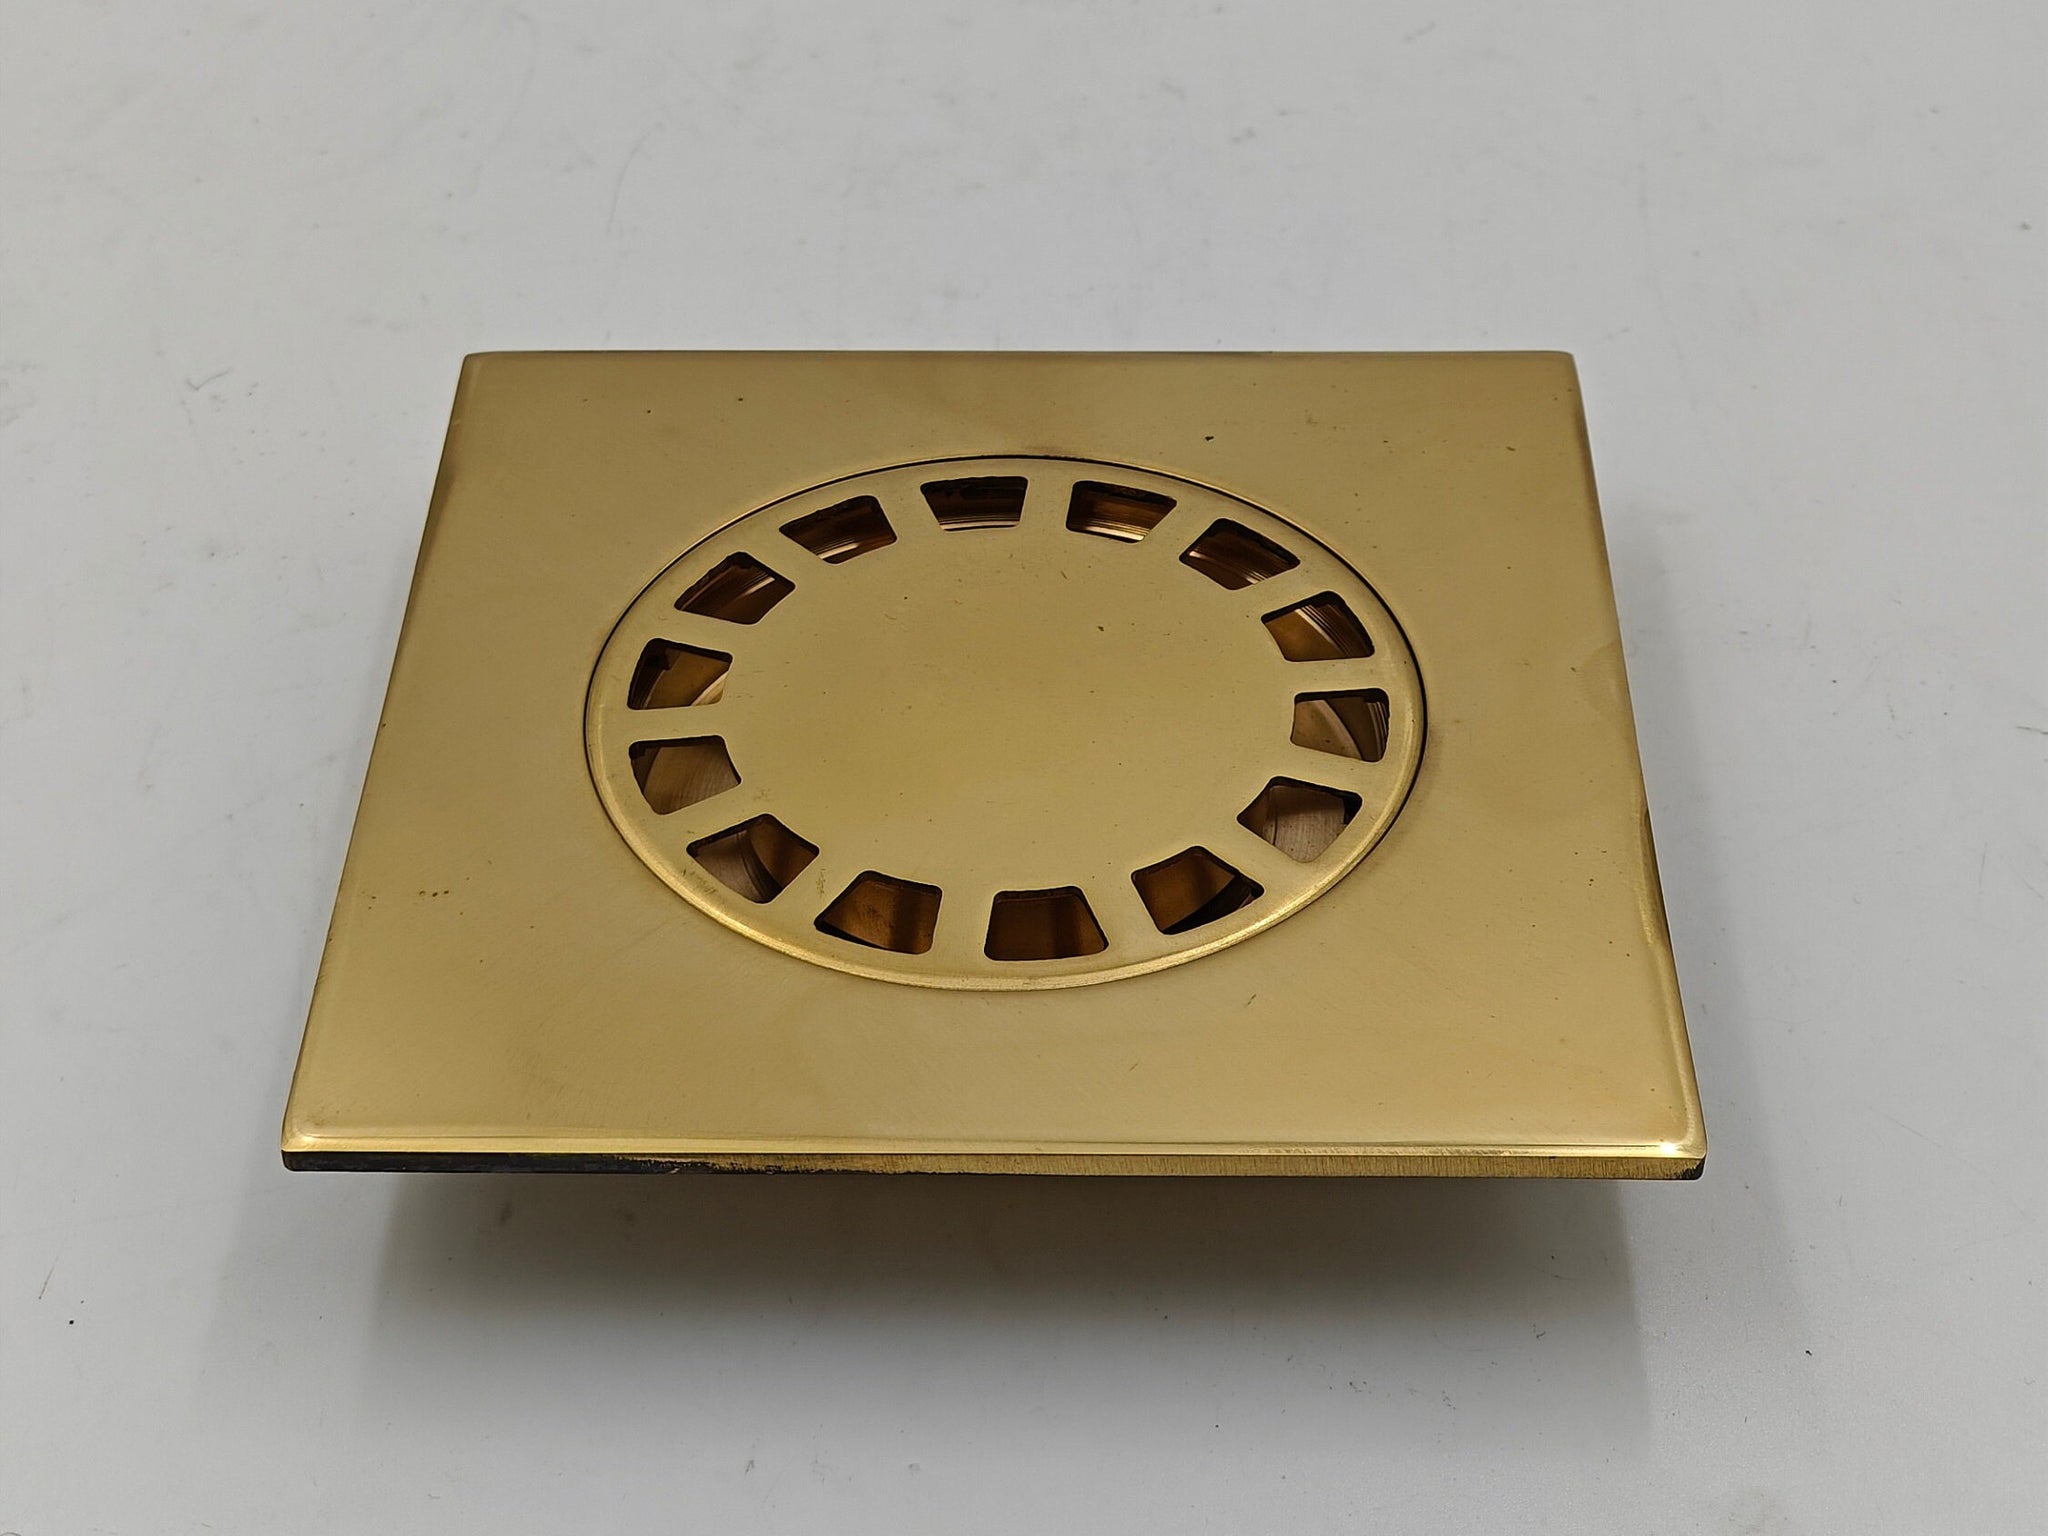 Square Floor Drain in Unlacquered Brass, Shower Floor Drain with Removable Cover